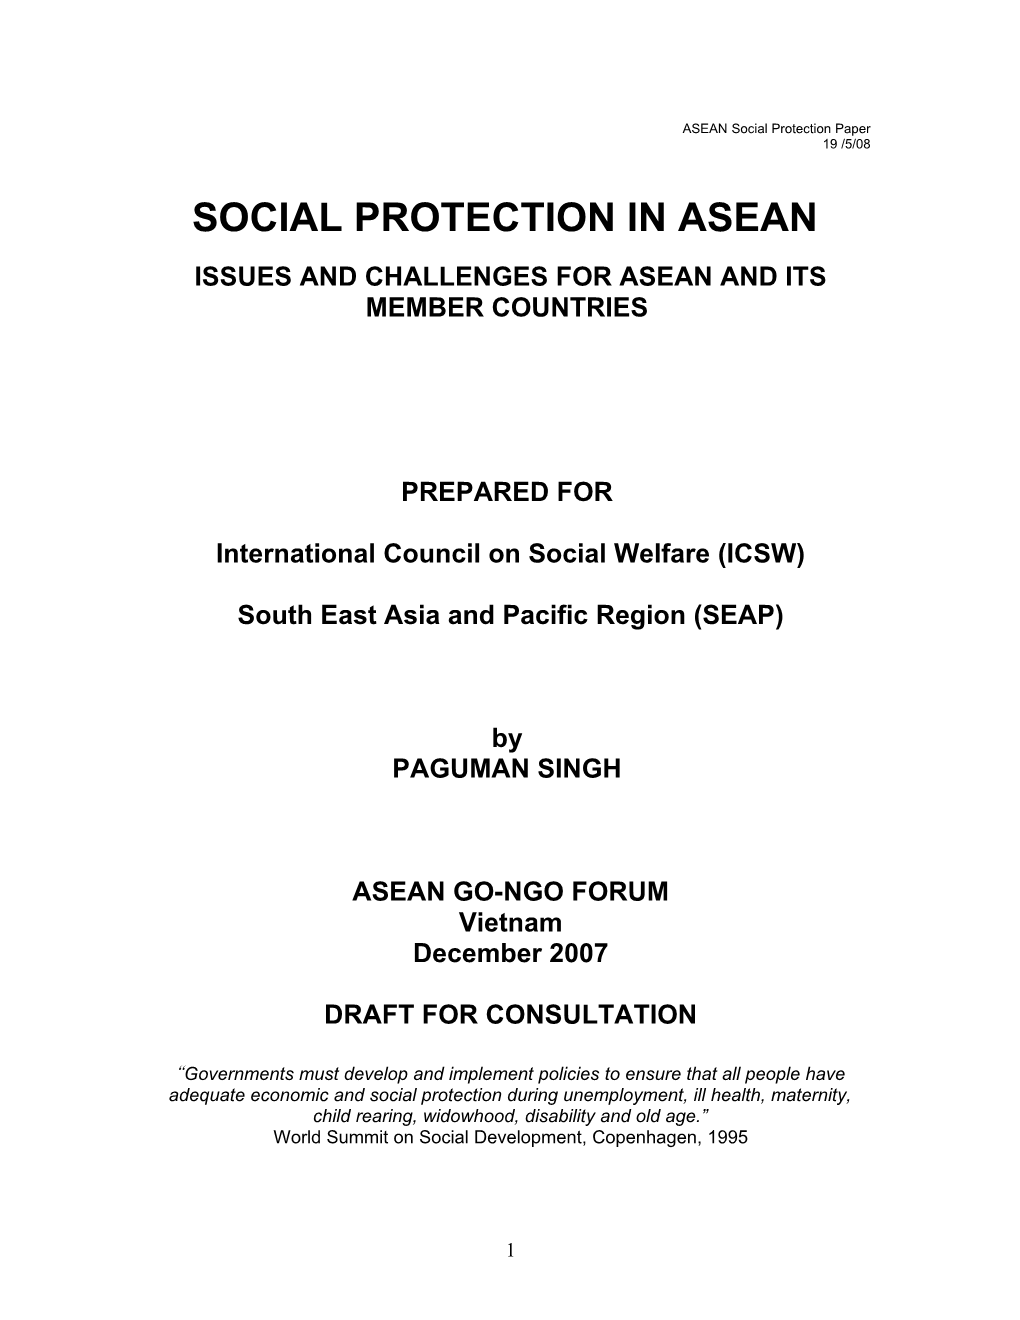 Social Security Coverage Within the Asean Region